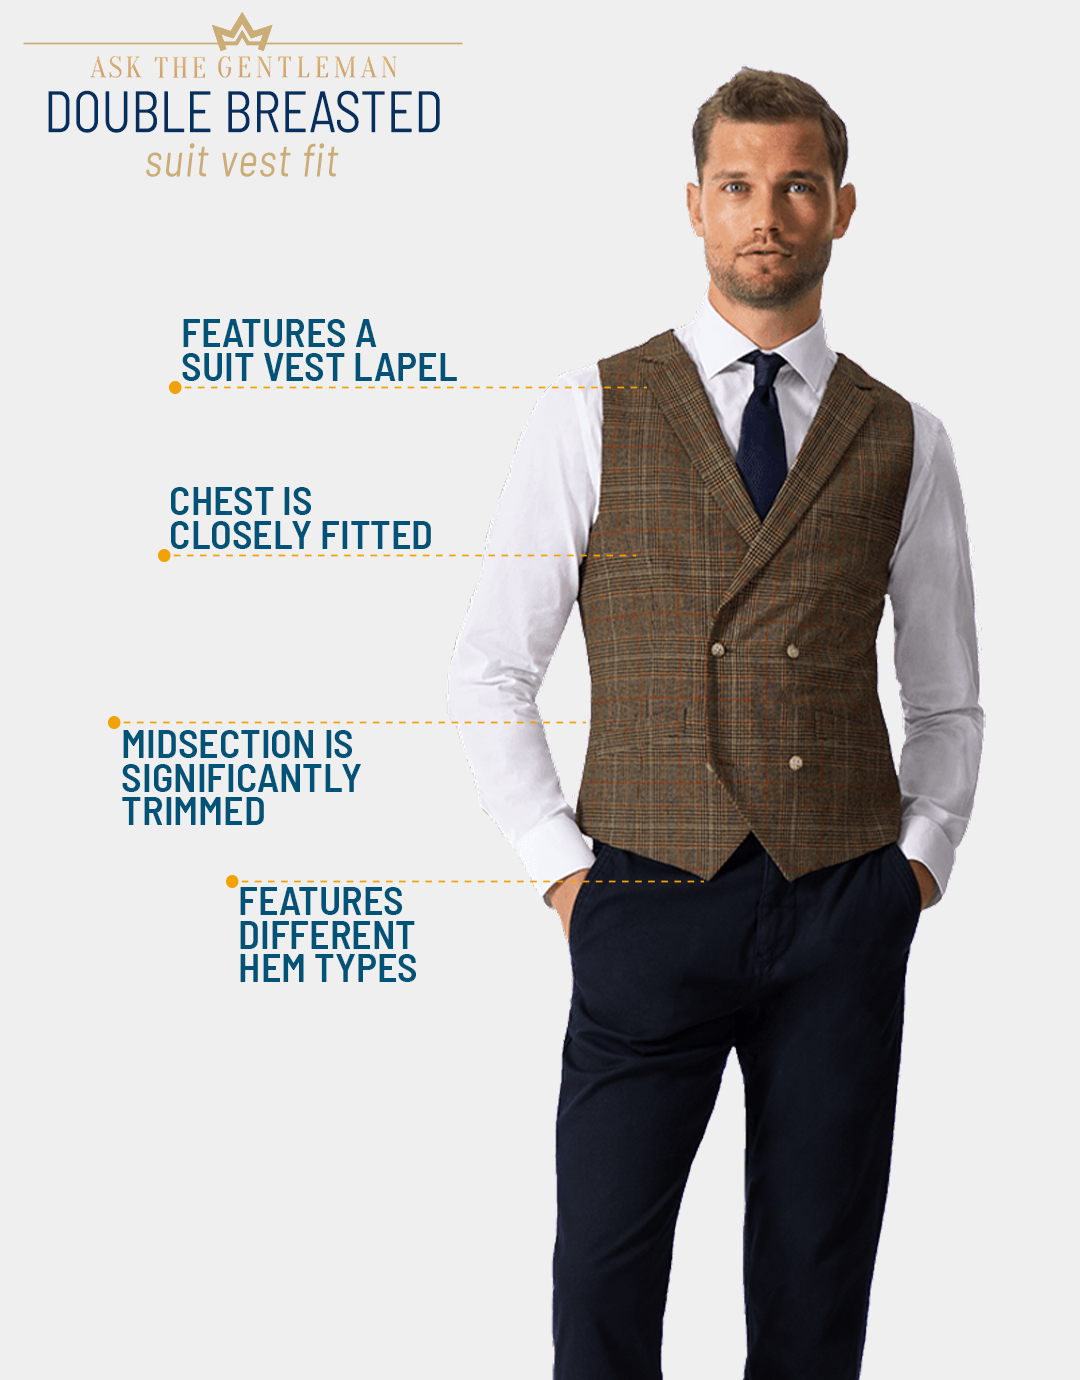 How should the double-breasted suit vest fit